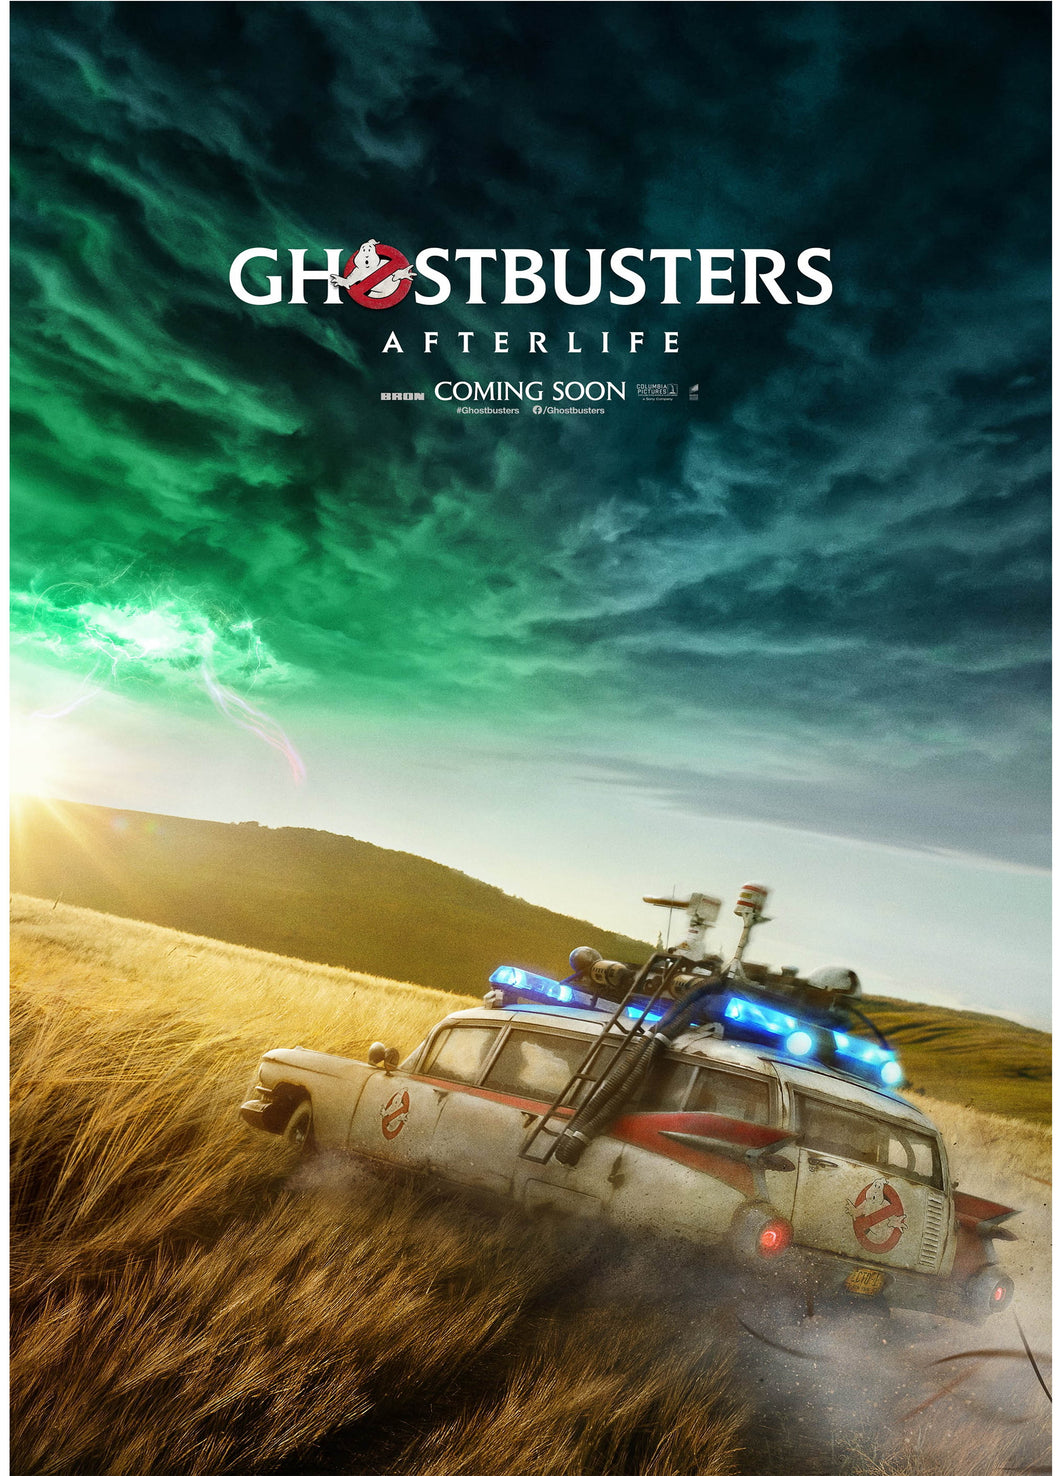 Ghostbusters Afterlife Movie Poster Framed or Unframed Glossy Poster Free UK Shipping!!!